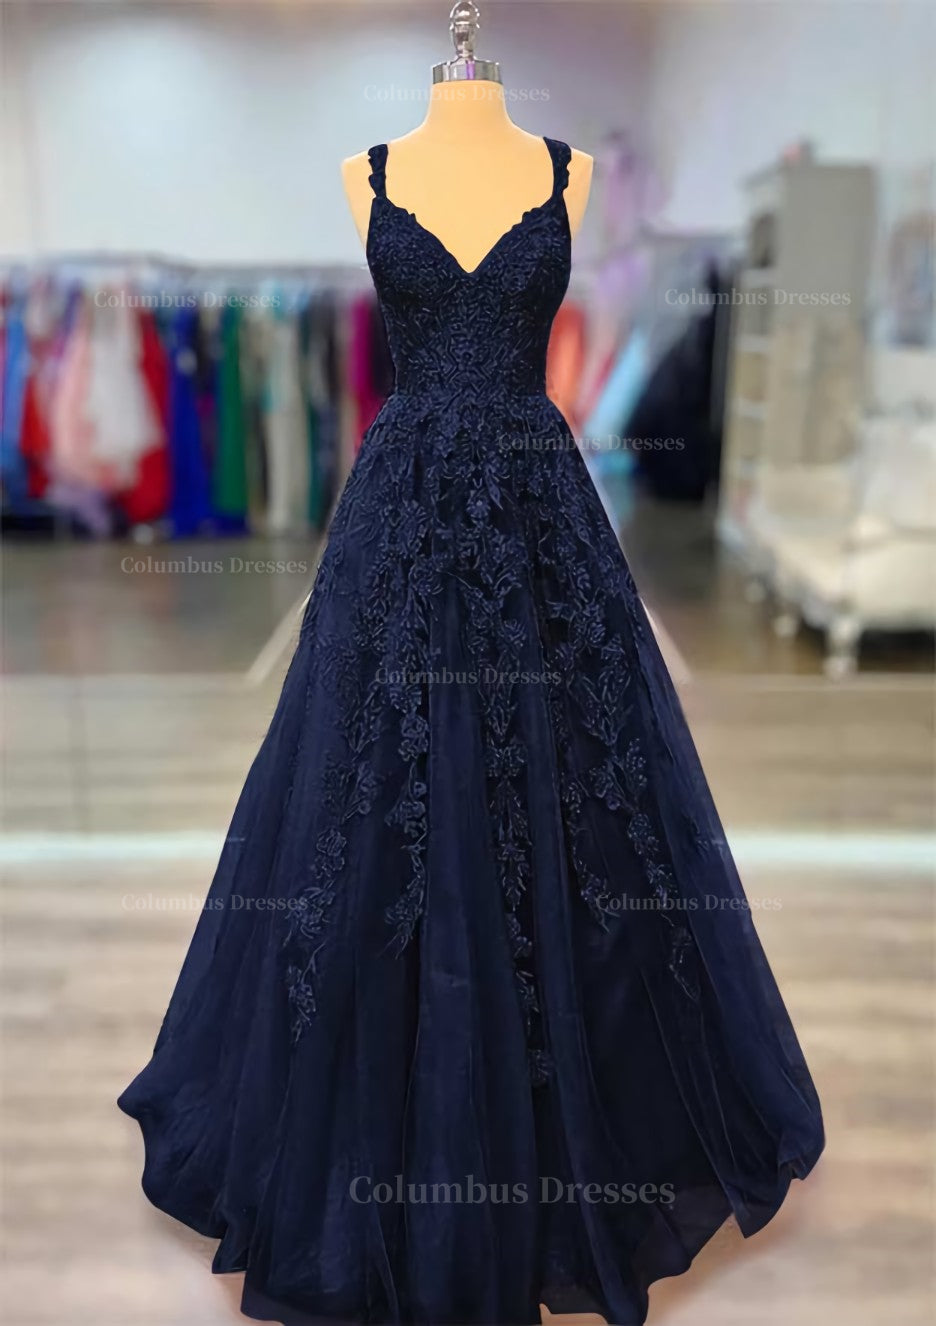 Black Formal Dress, A-line V Neck Spaghetti Straps Long/Floor-Length Lace Prom Dress With Beading